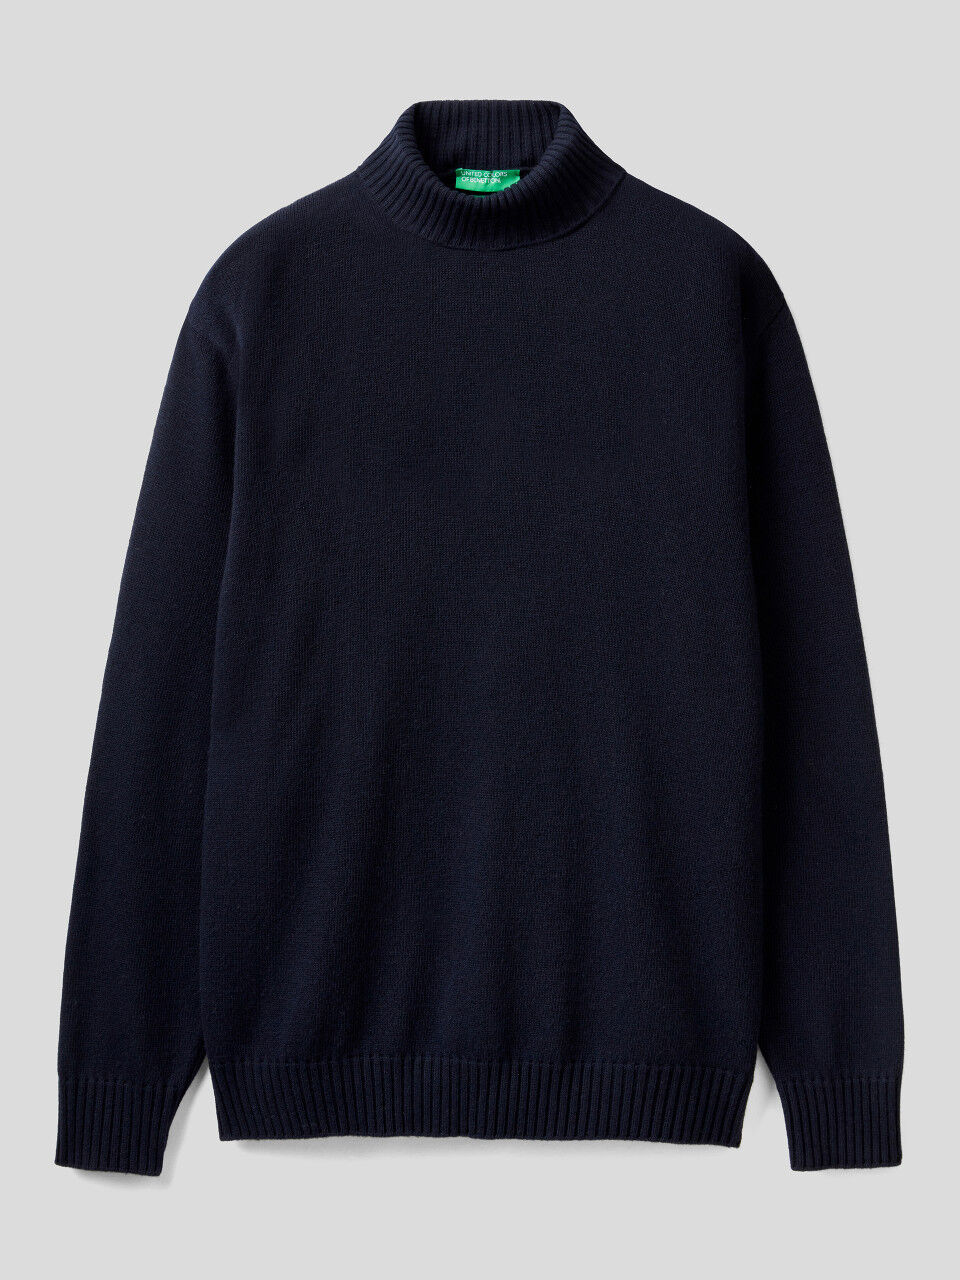 Valentino Wool High-neck Intarsia Sweater in Black for Men Mens Clothing Sweaters and knitwear Turtlenecks 